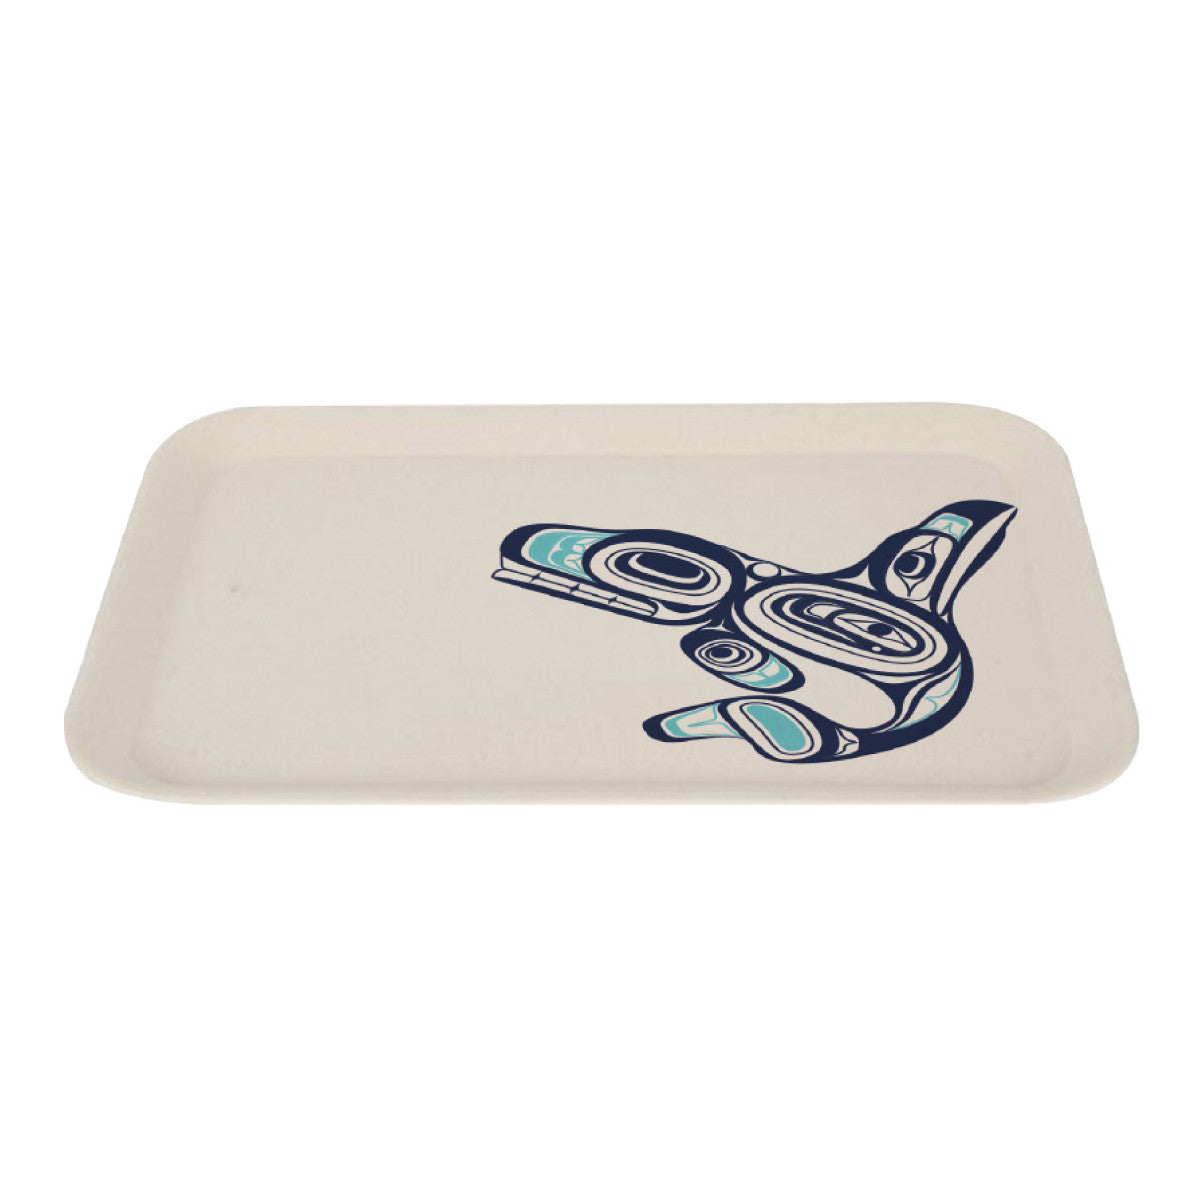 Whale Bamboo Serving Tray by Ernest Swanson (Clearance)